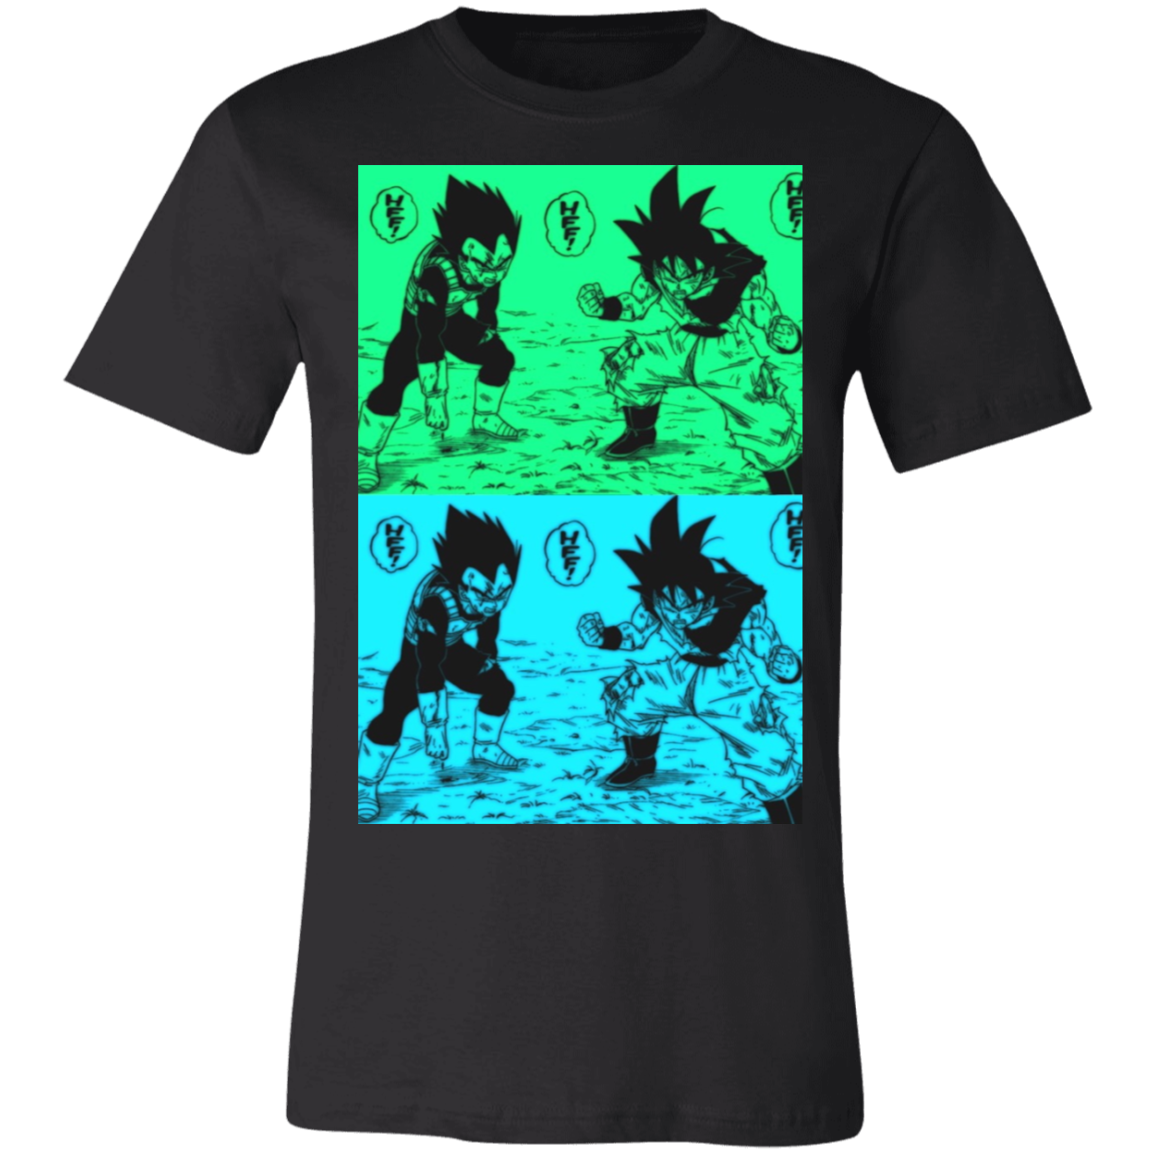 goku and vegeta graphic tee in black, the top of the design is green and the bottom is blue